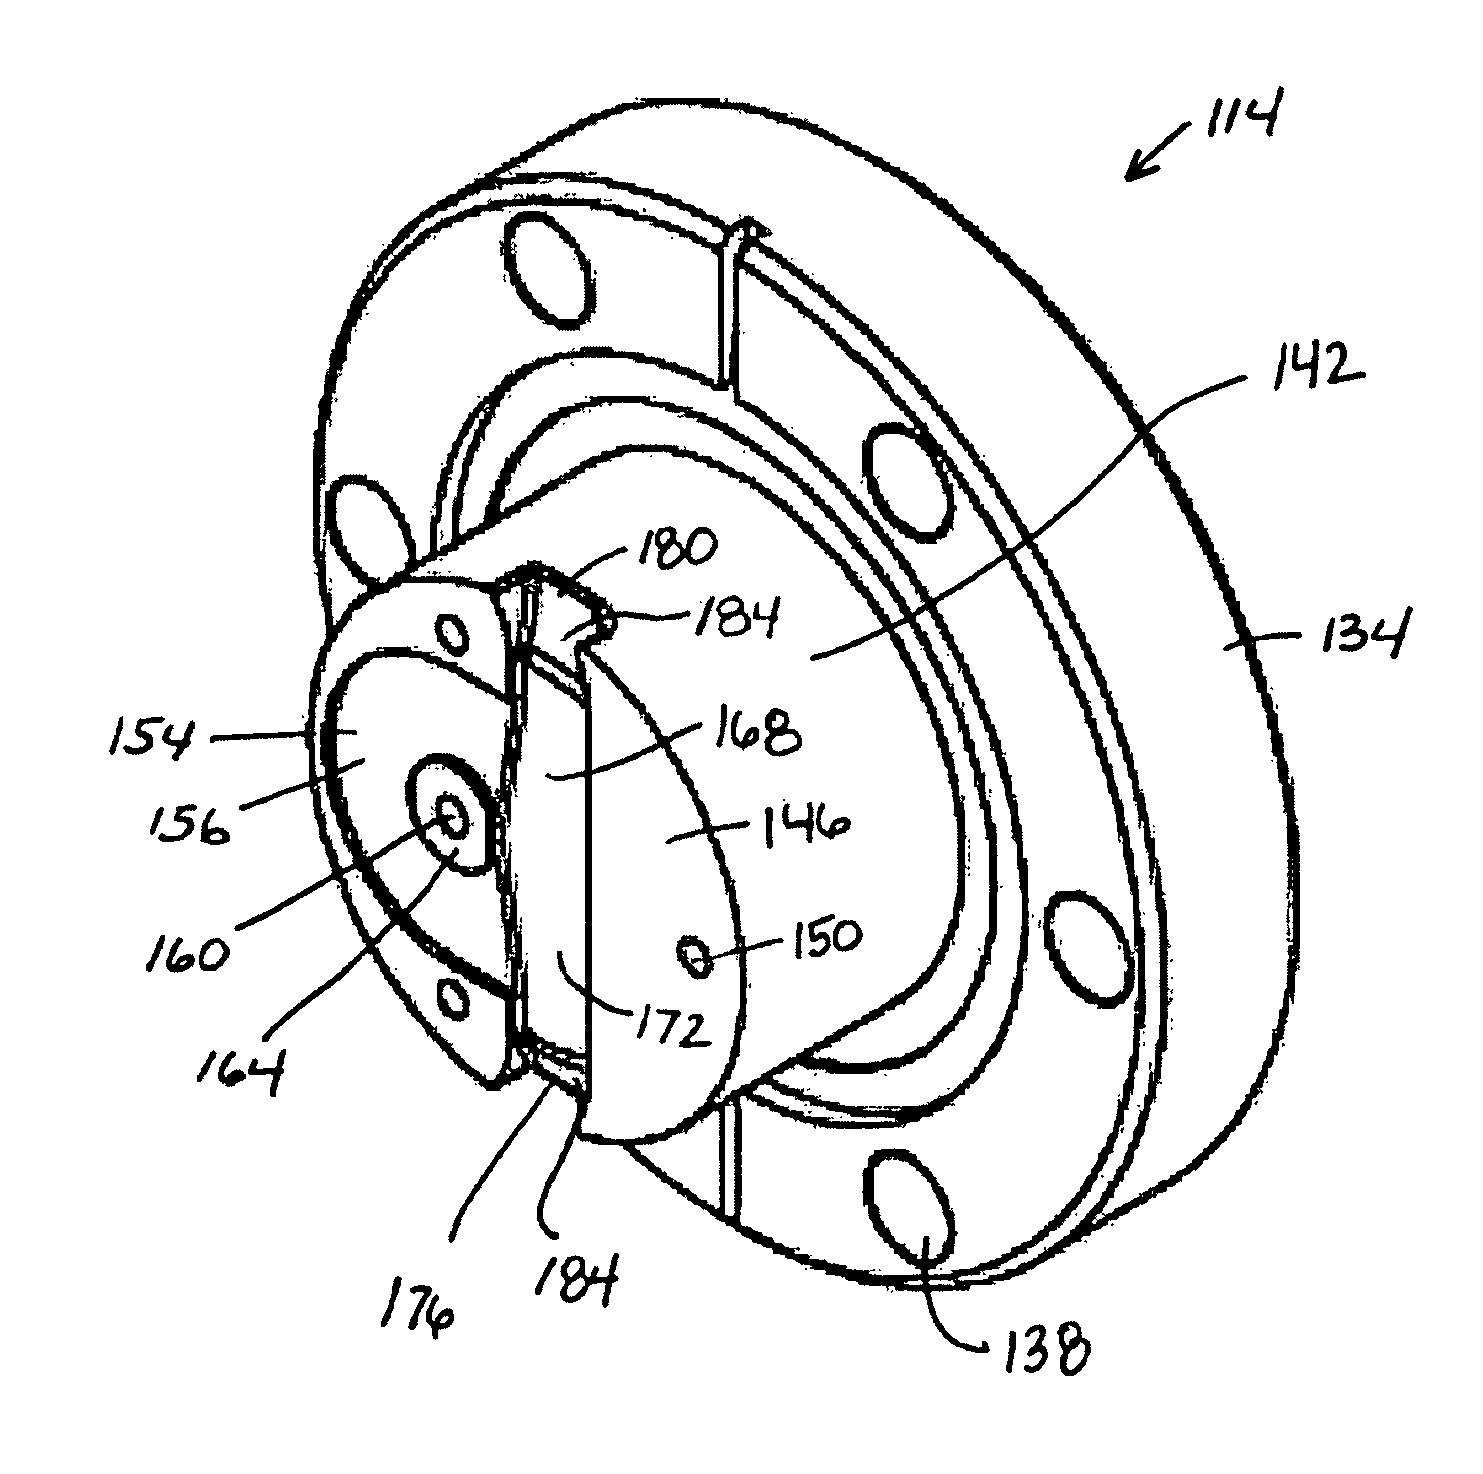 Target pedestal assembly and method of preserving the target